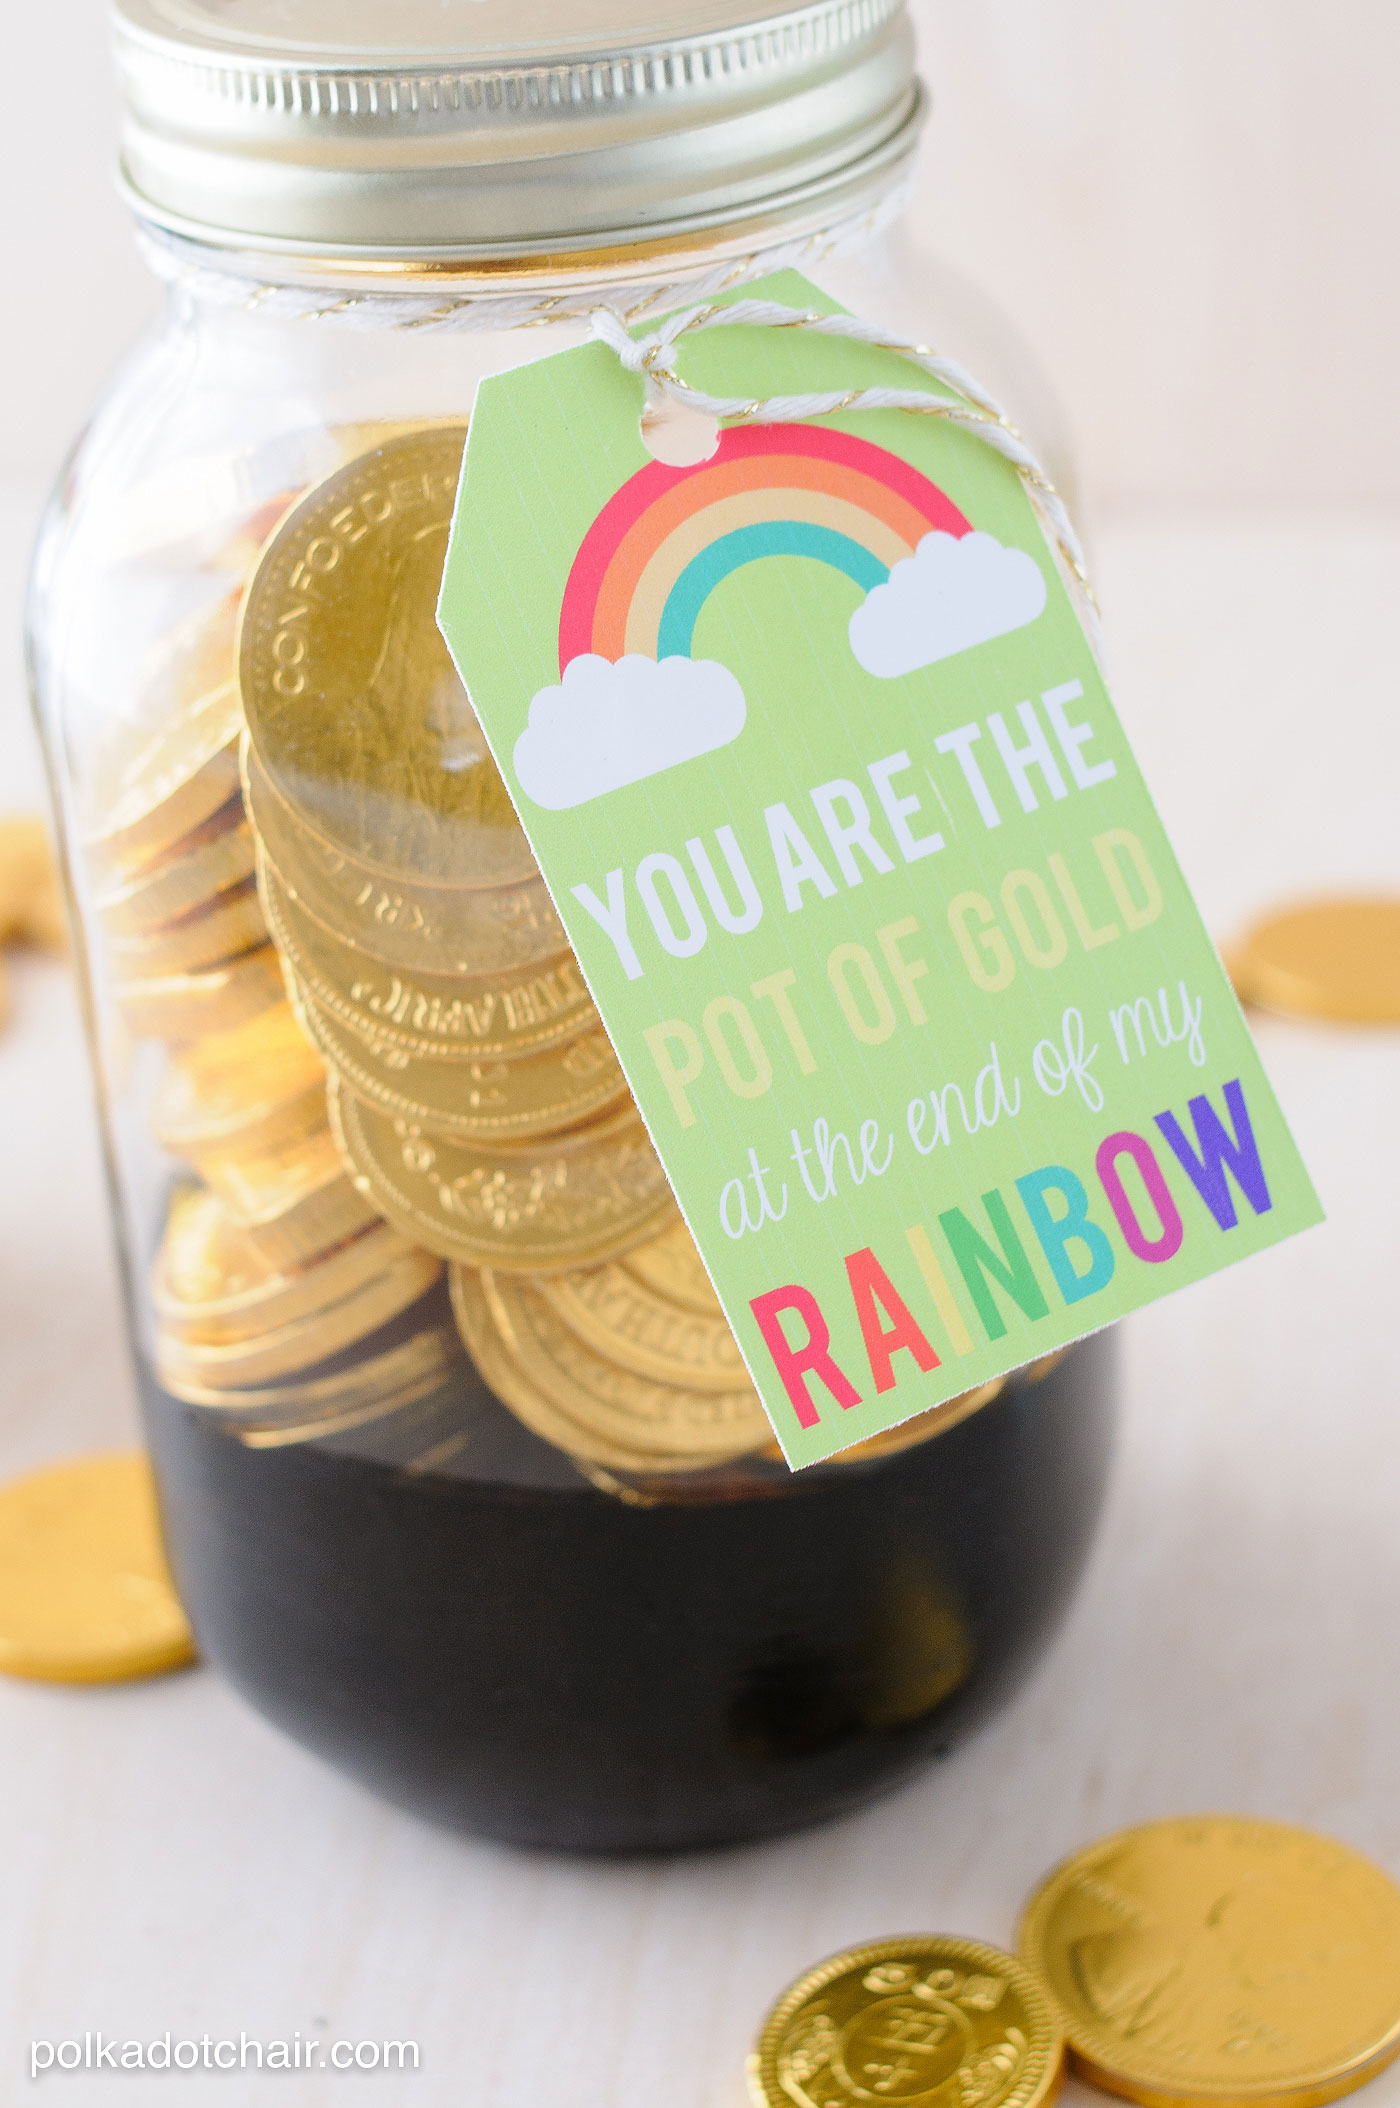 You Are the Pot Of Gold | Polkadot Chair